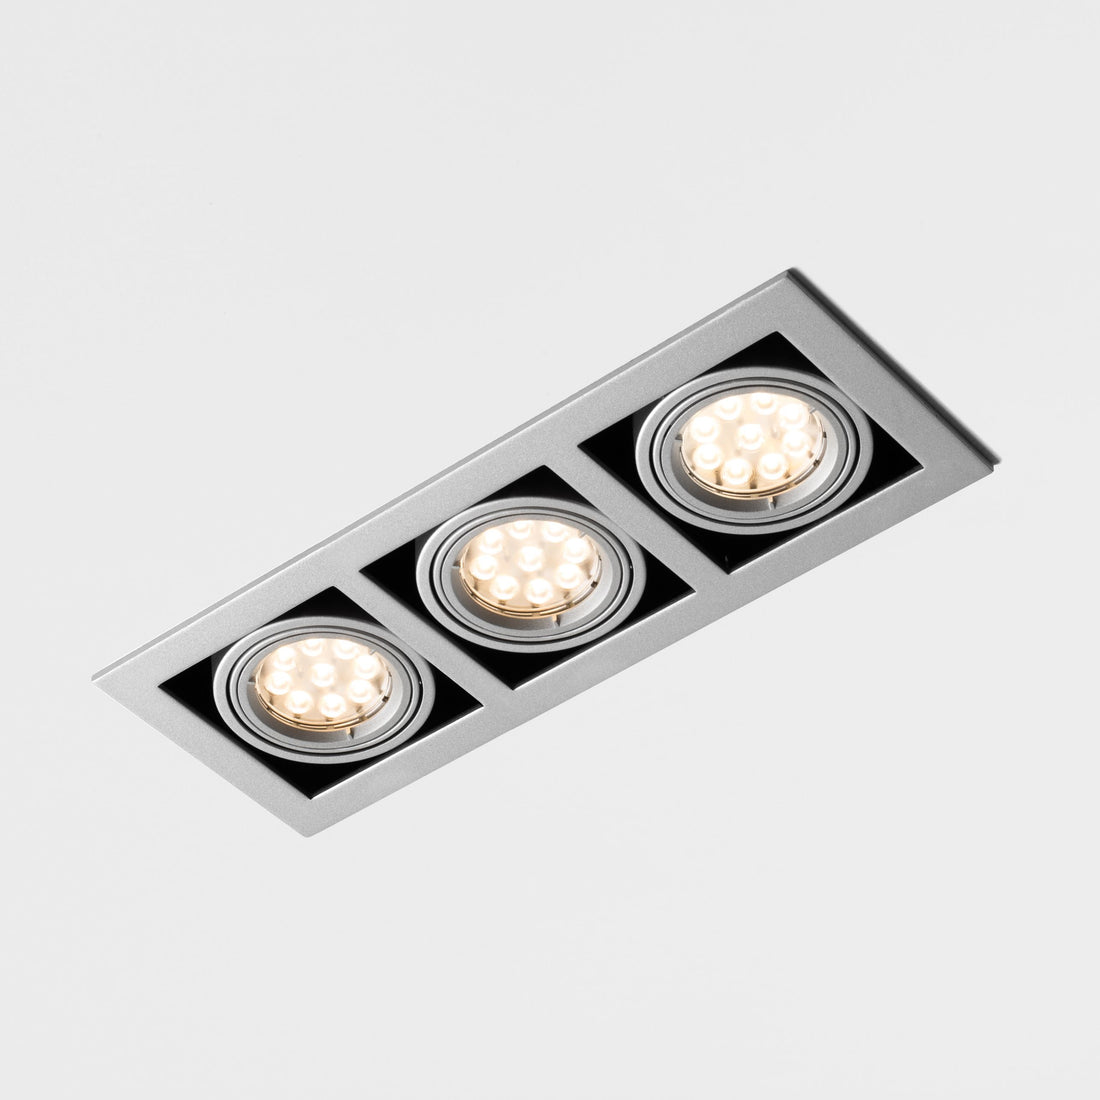 Recessed Triple LED Down Light.  Silver Finish.